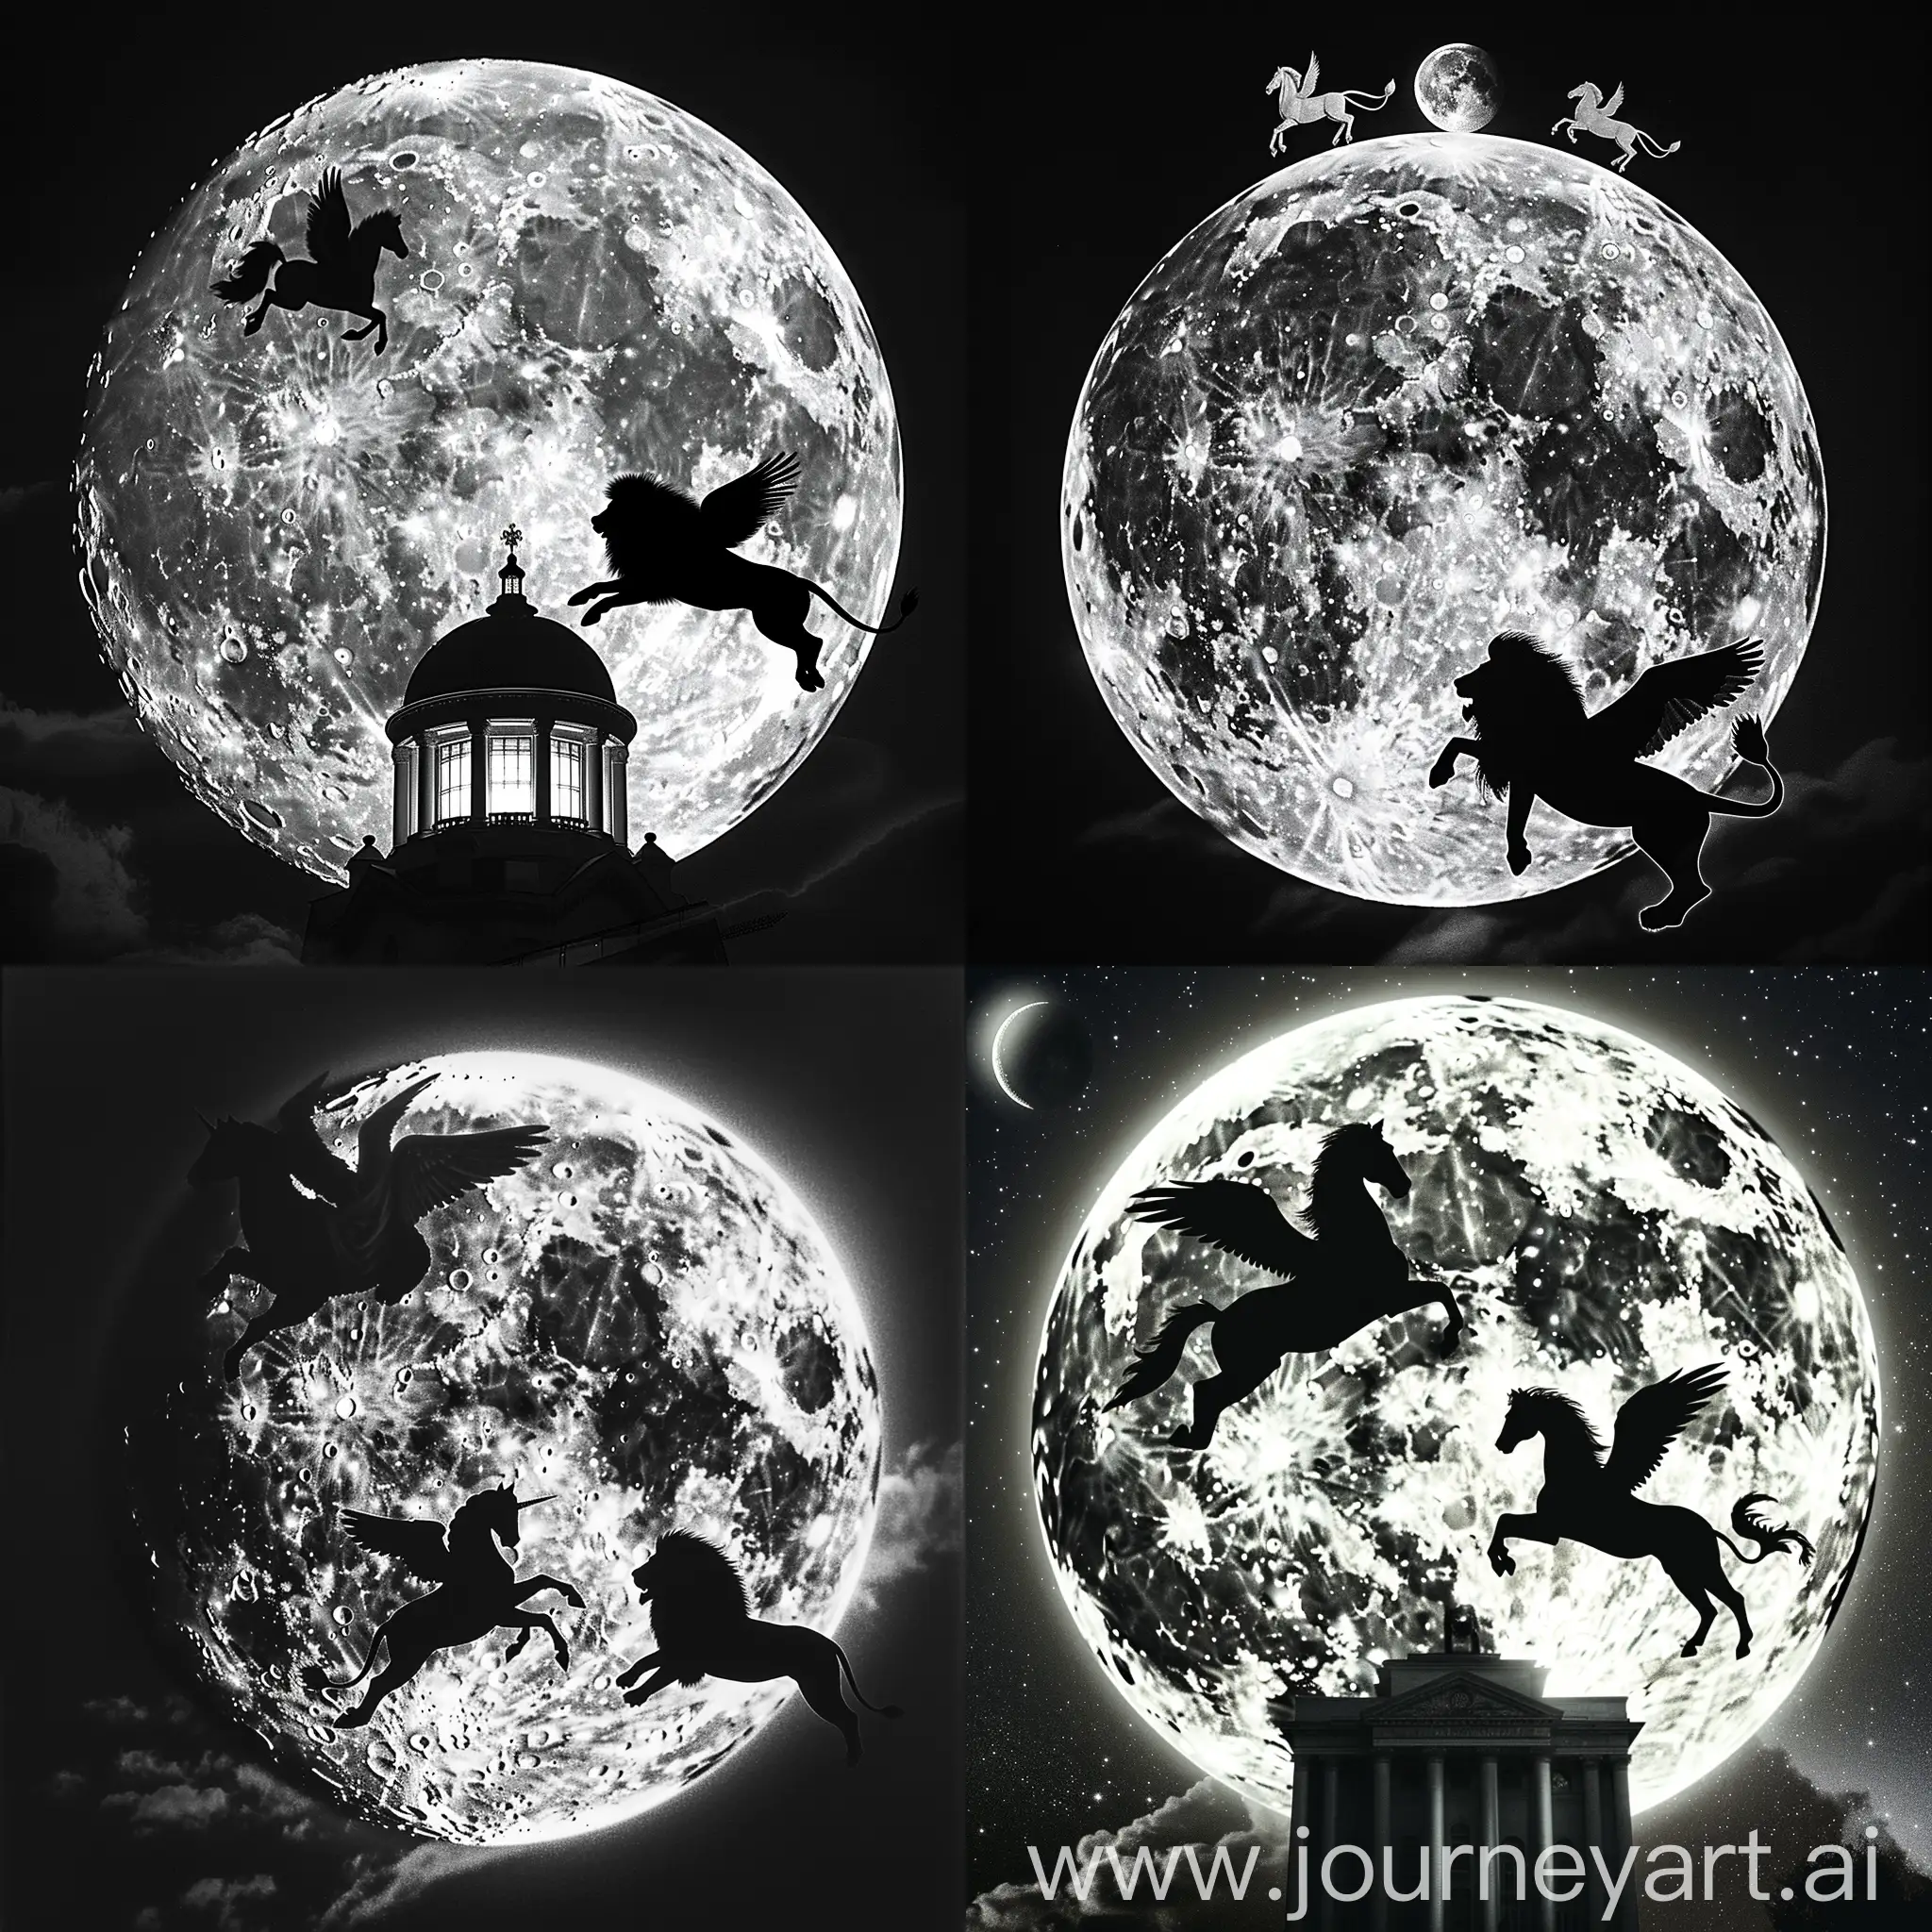 bright night, full moon in the centre from above, pegasus and lion with wings fly in front of the moon, only their dark silhouettes are visible, from below in the light of the moon you can see the main body of the kpi, dark, realistic, the moon is big and full, Kyiv Polytechnic Institute